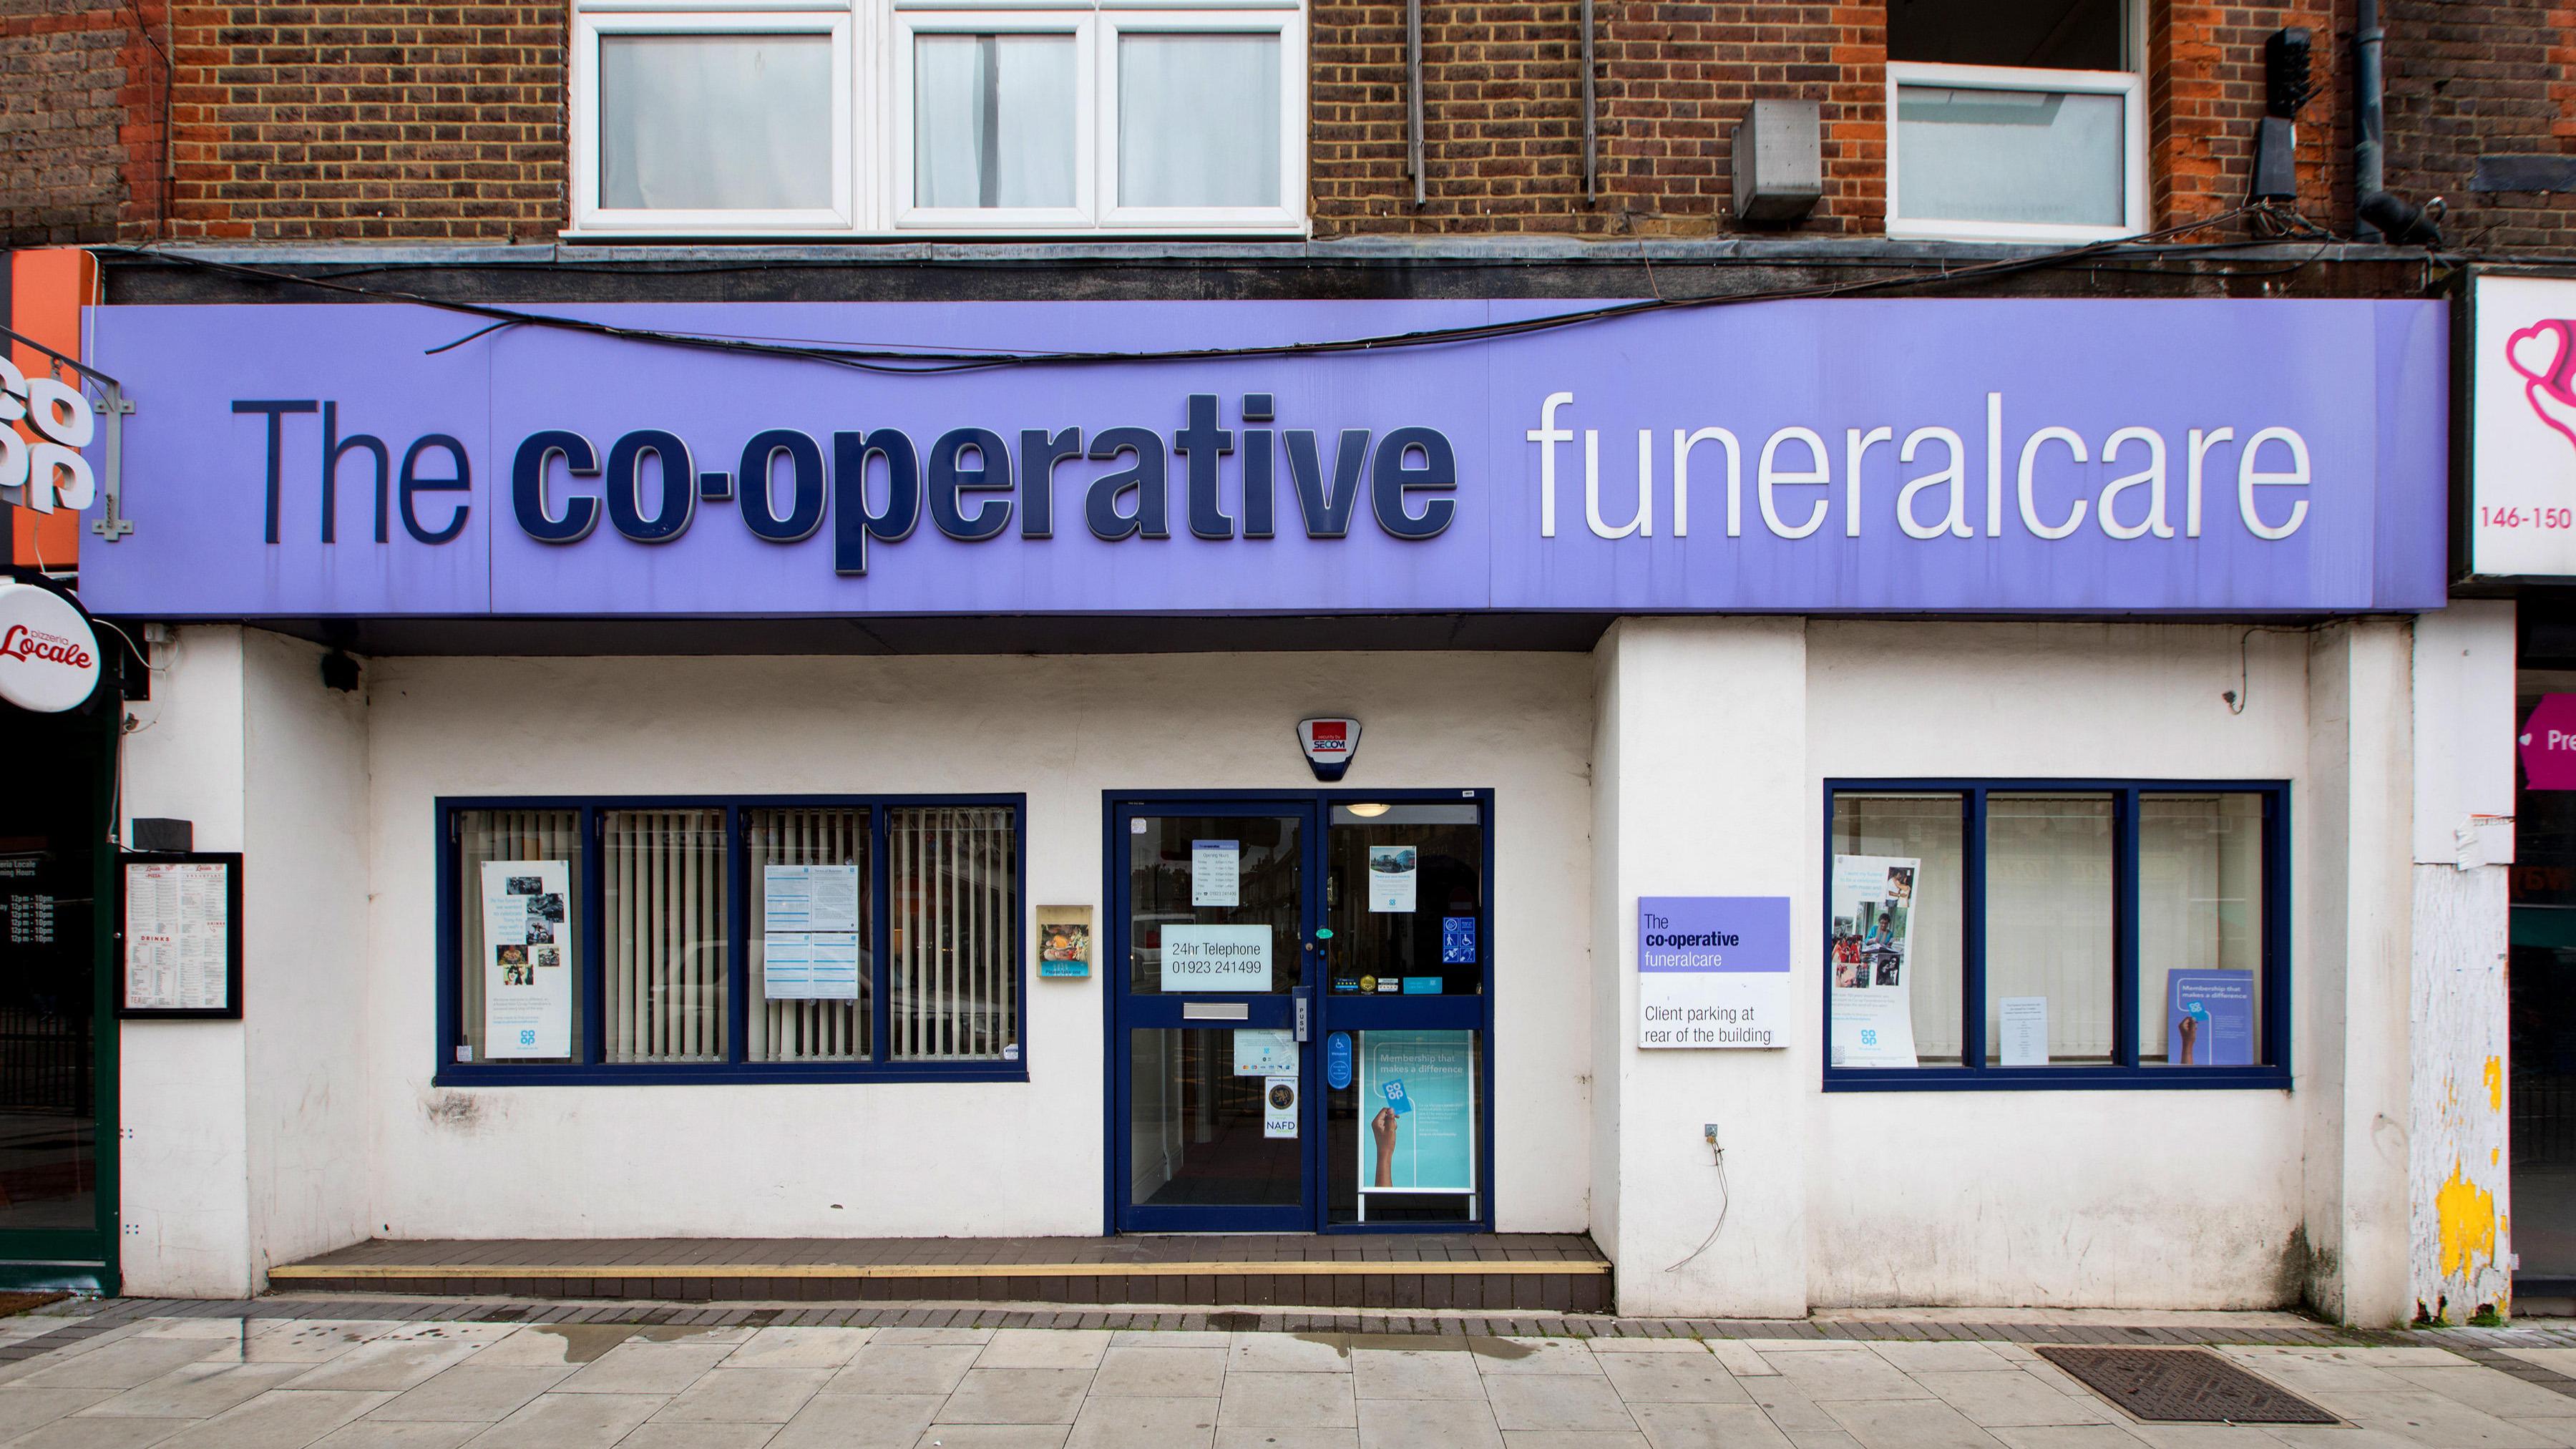 Watford St Albans Funeralcare Co-op Funeralcare, St Albans Rd. Watford 01923 241499